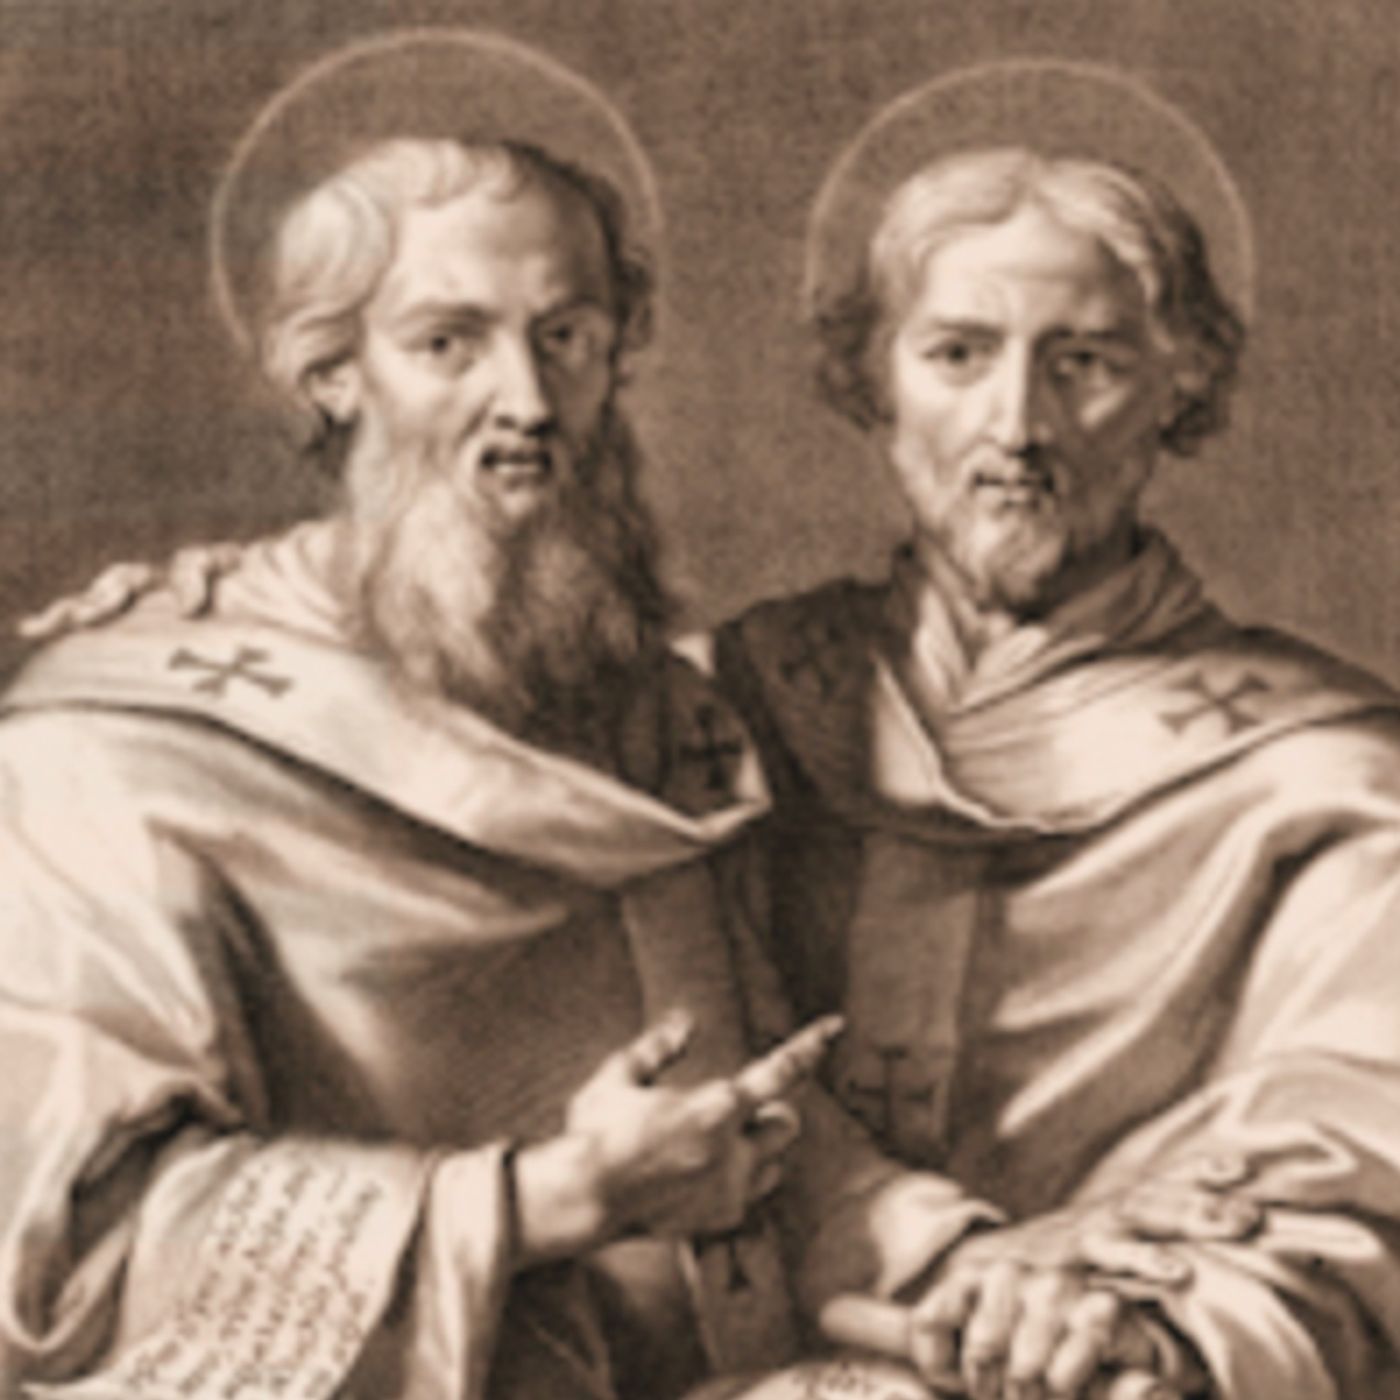 January 2: Saints Basil the Great and Gregory Nazianzen, Bishops and Doctors